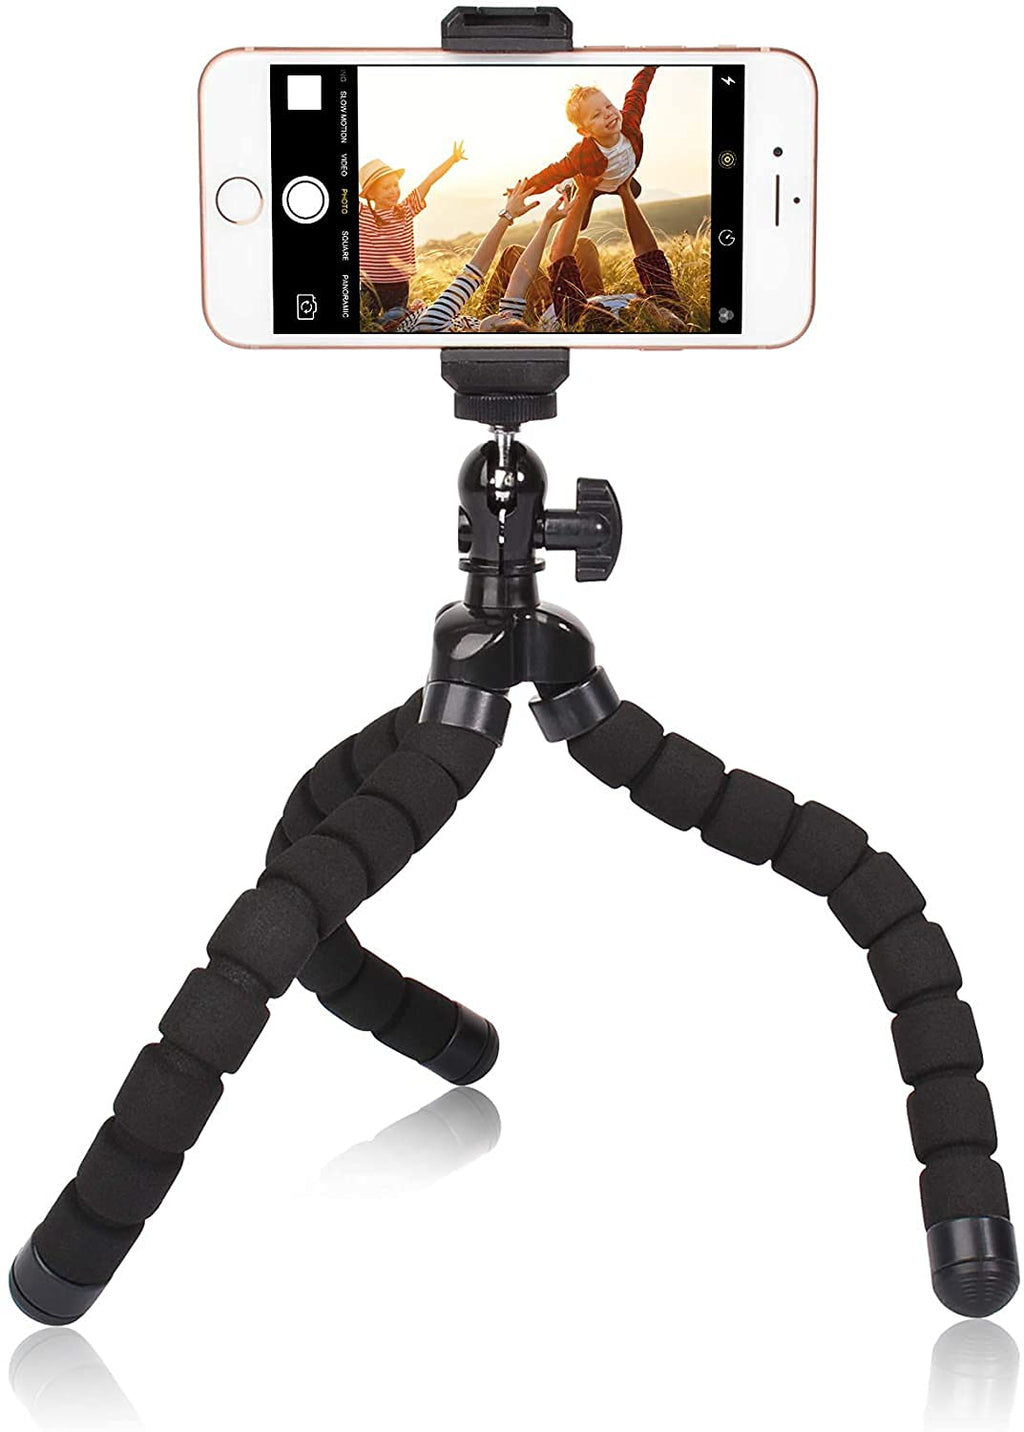  [AUSTRALIA] - A&N Tripod Premium Flexible Mobile Phone Tripod Stand Compatible with All Phones & Cameras